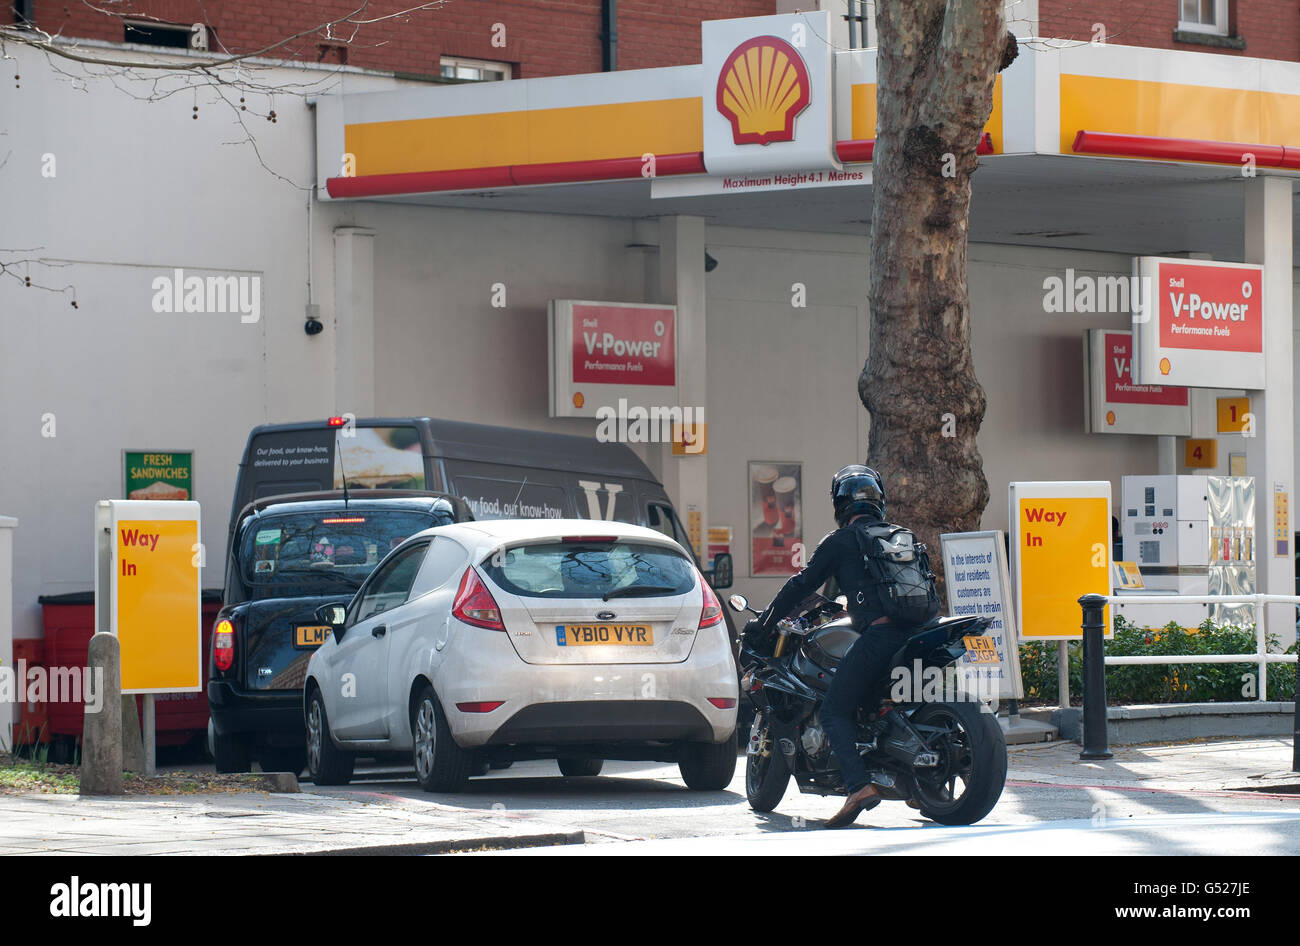 Motorists queue to buy petrol at a petrol station in central London, after sales of petrol and diesel increased dramatically yesterday as motorists flocked to garages to fill up following controversial advice from the Government ahead of a possible strike by fuel tanker drivers. Stock Photo